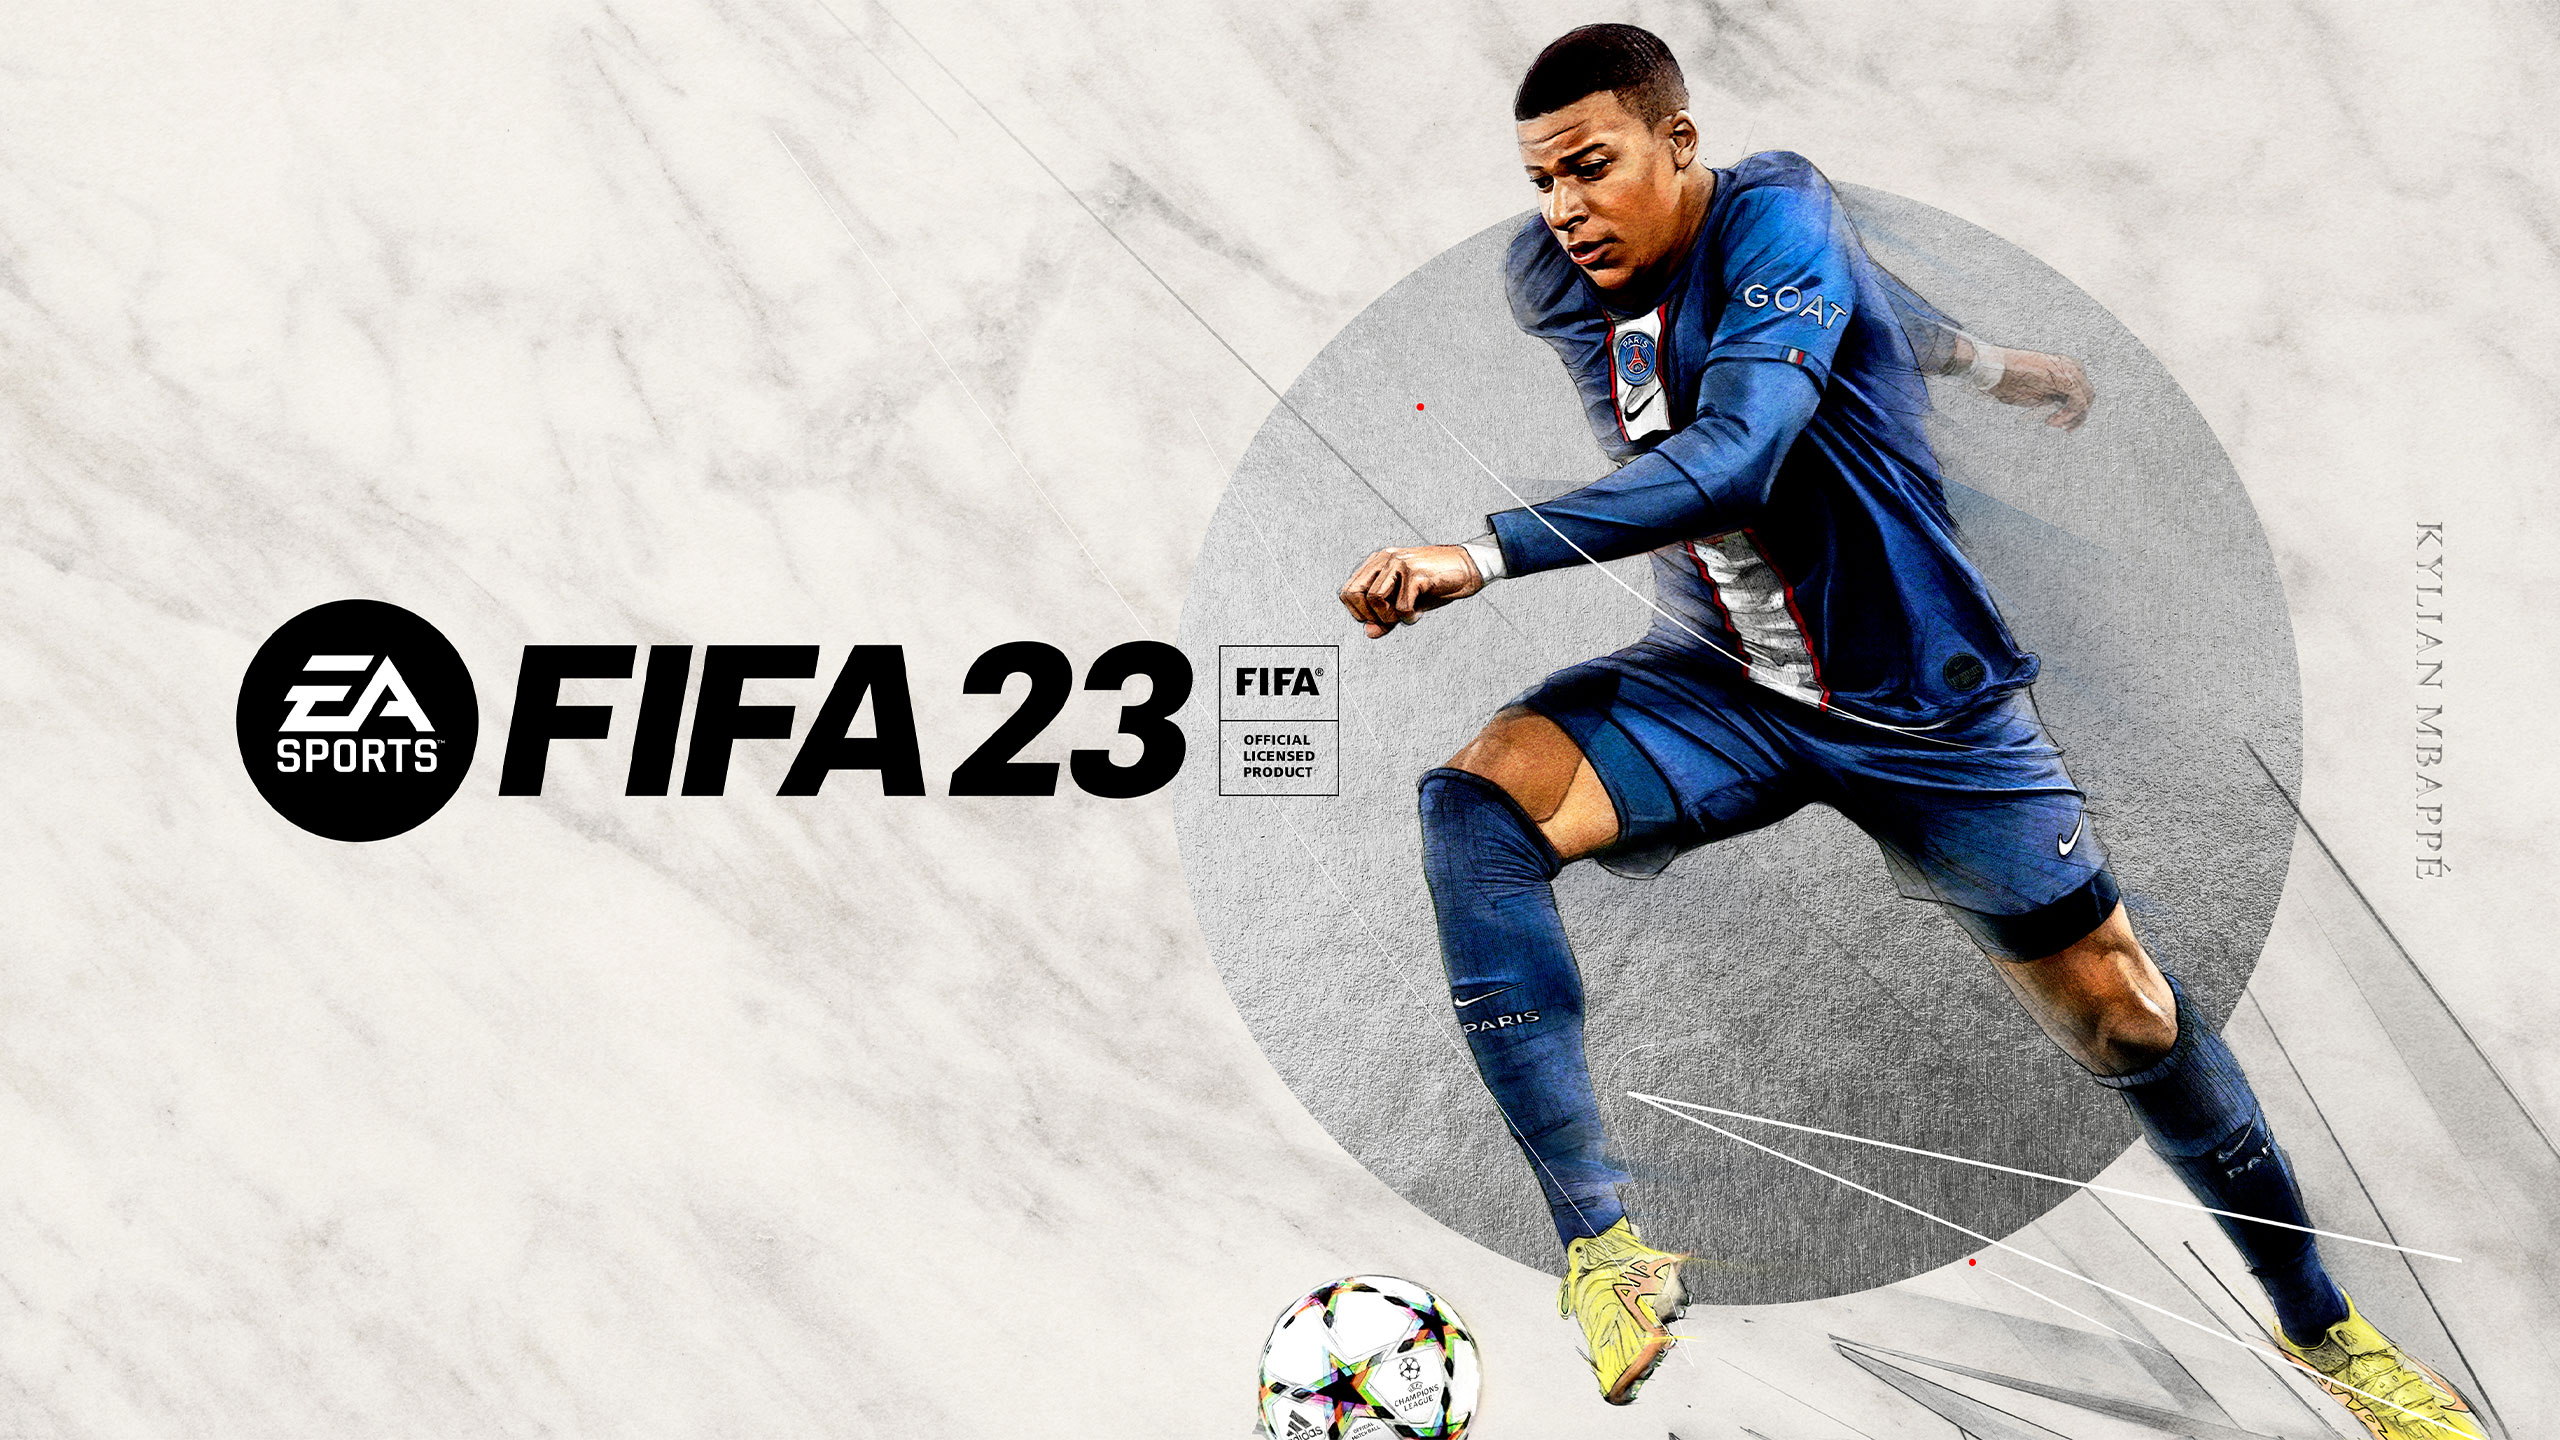 Player's favorite games: FIFA 23